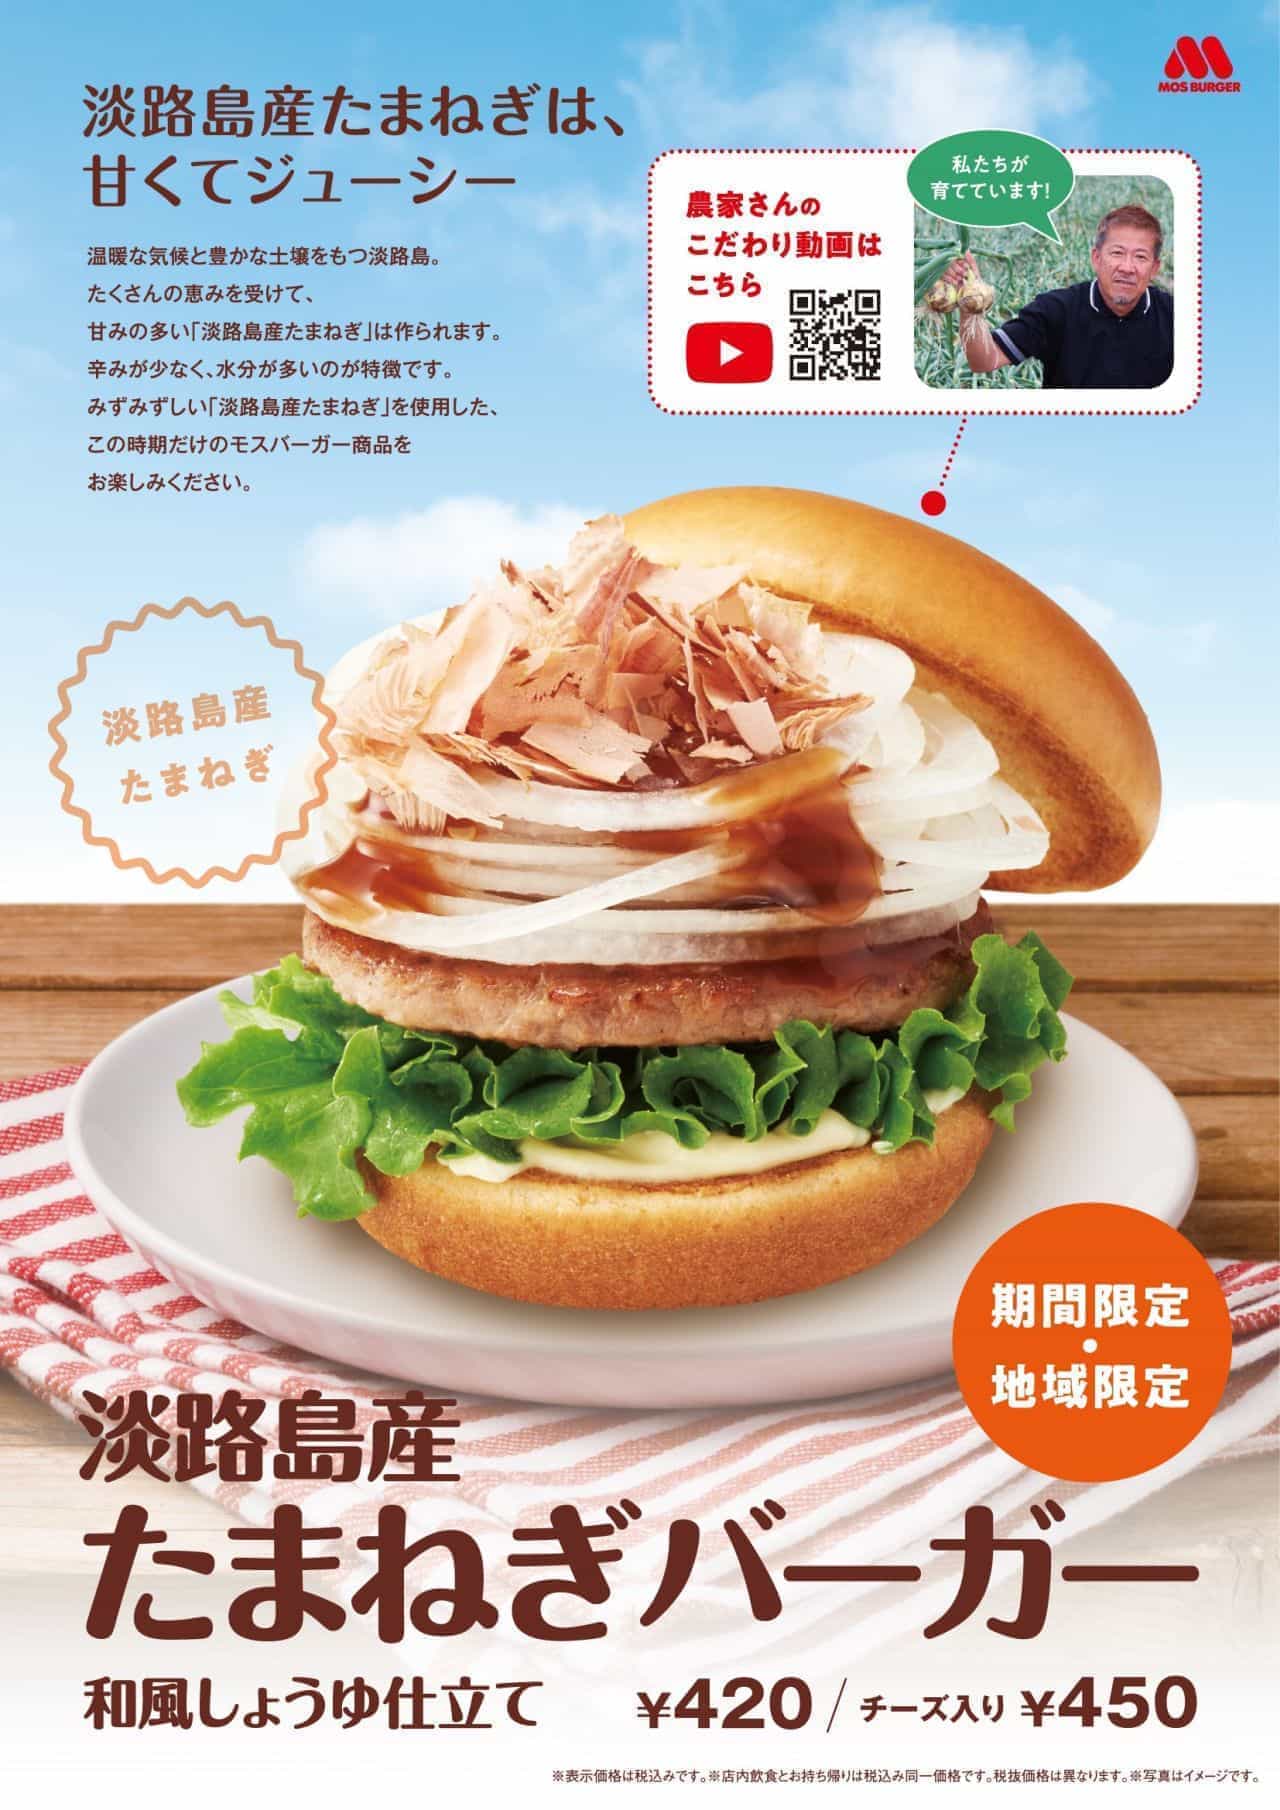 Mos Burger "Onion burger made by a farmer who is particular about Awaji Island Japanese style soy sauce"